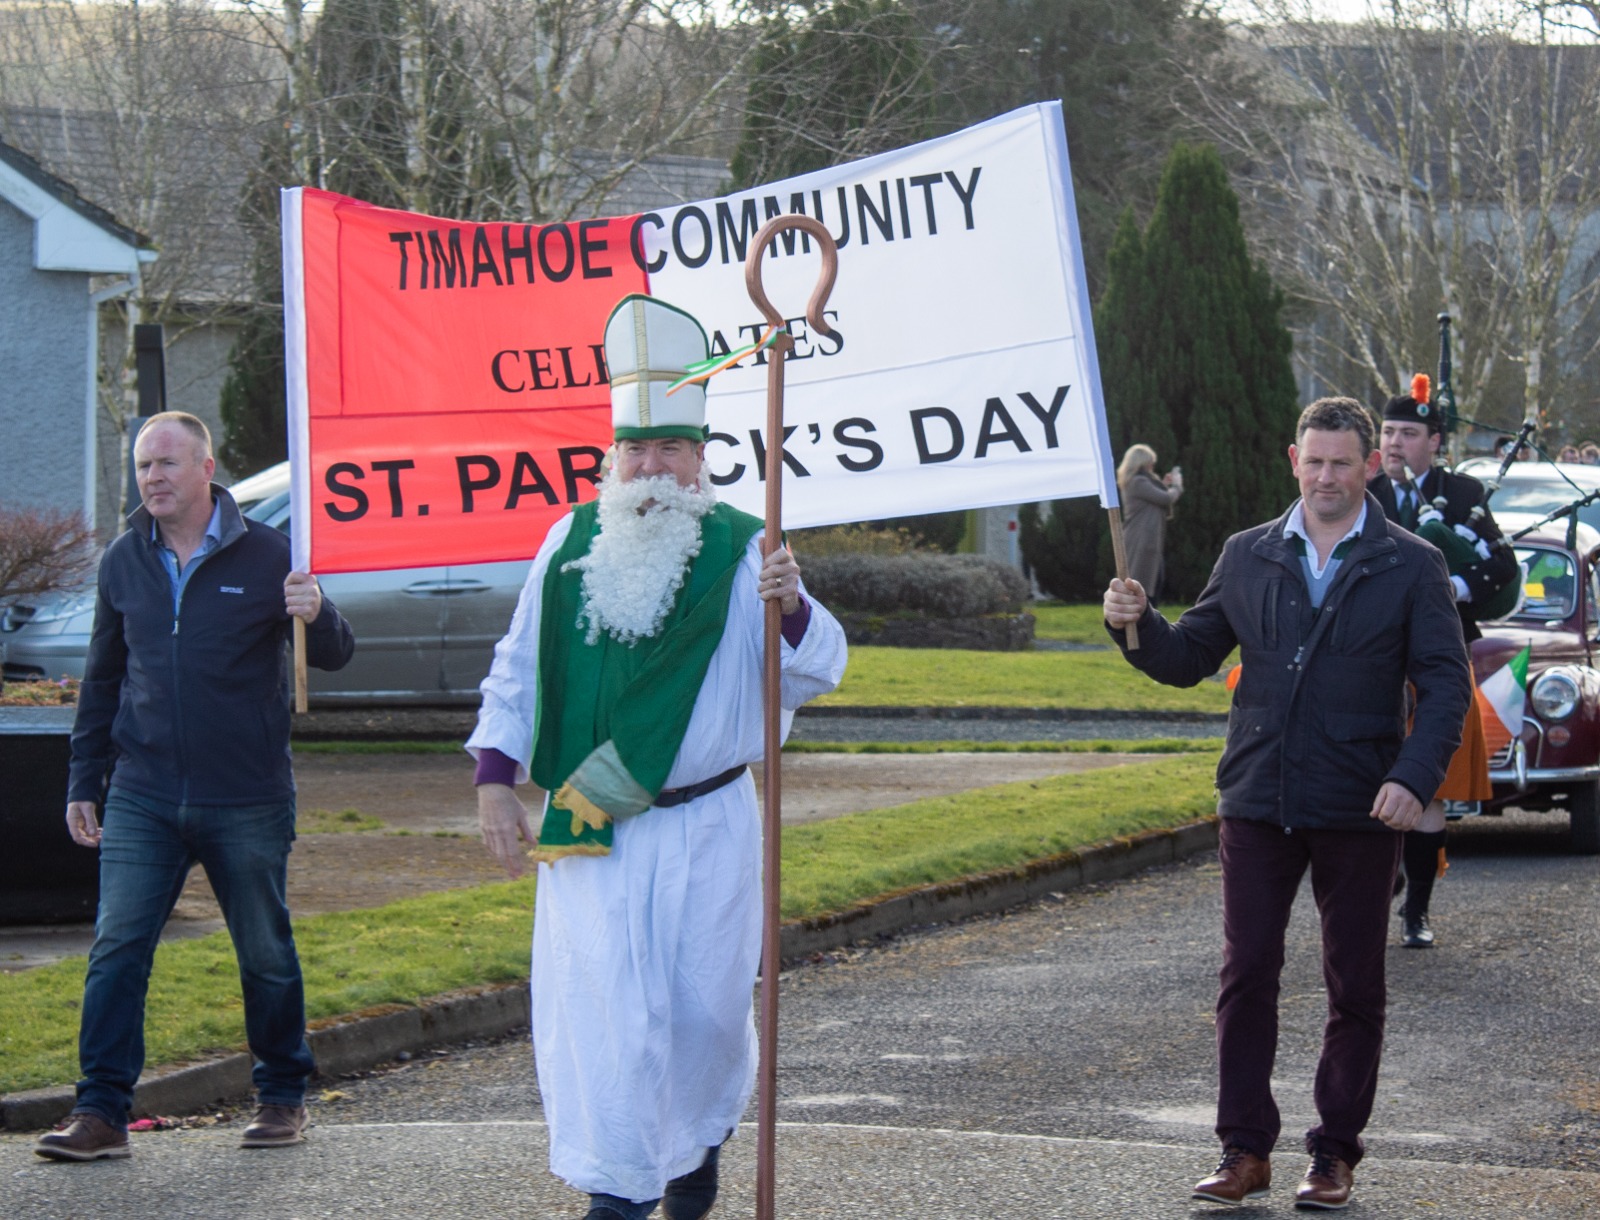 Timahoe parade